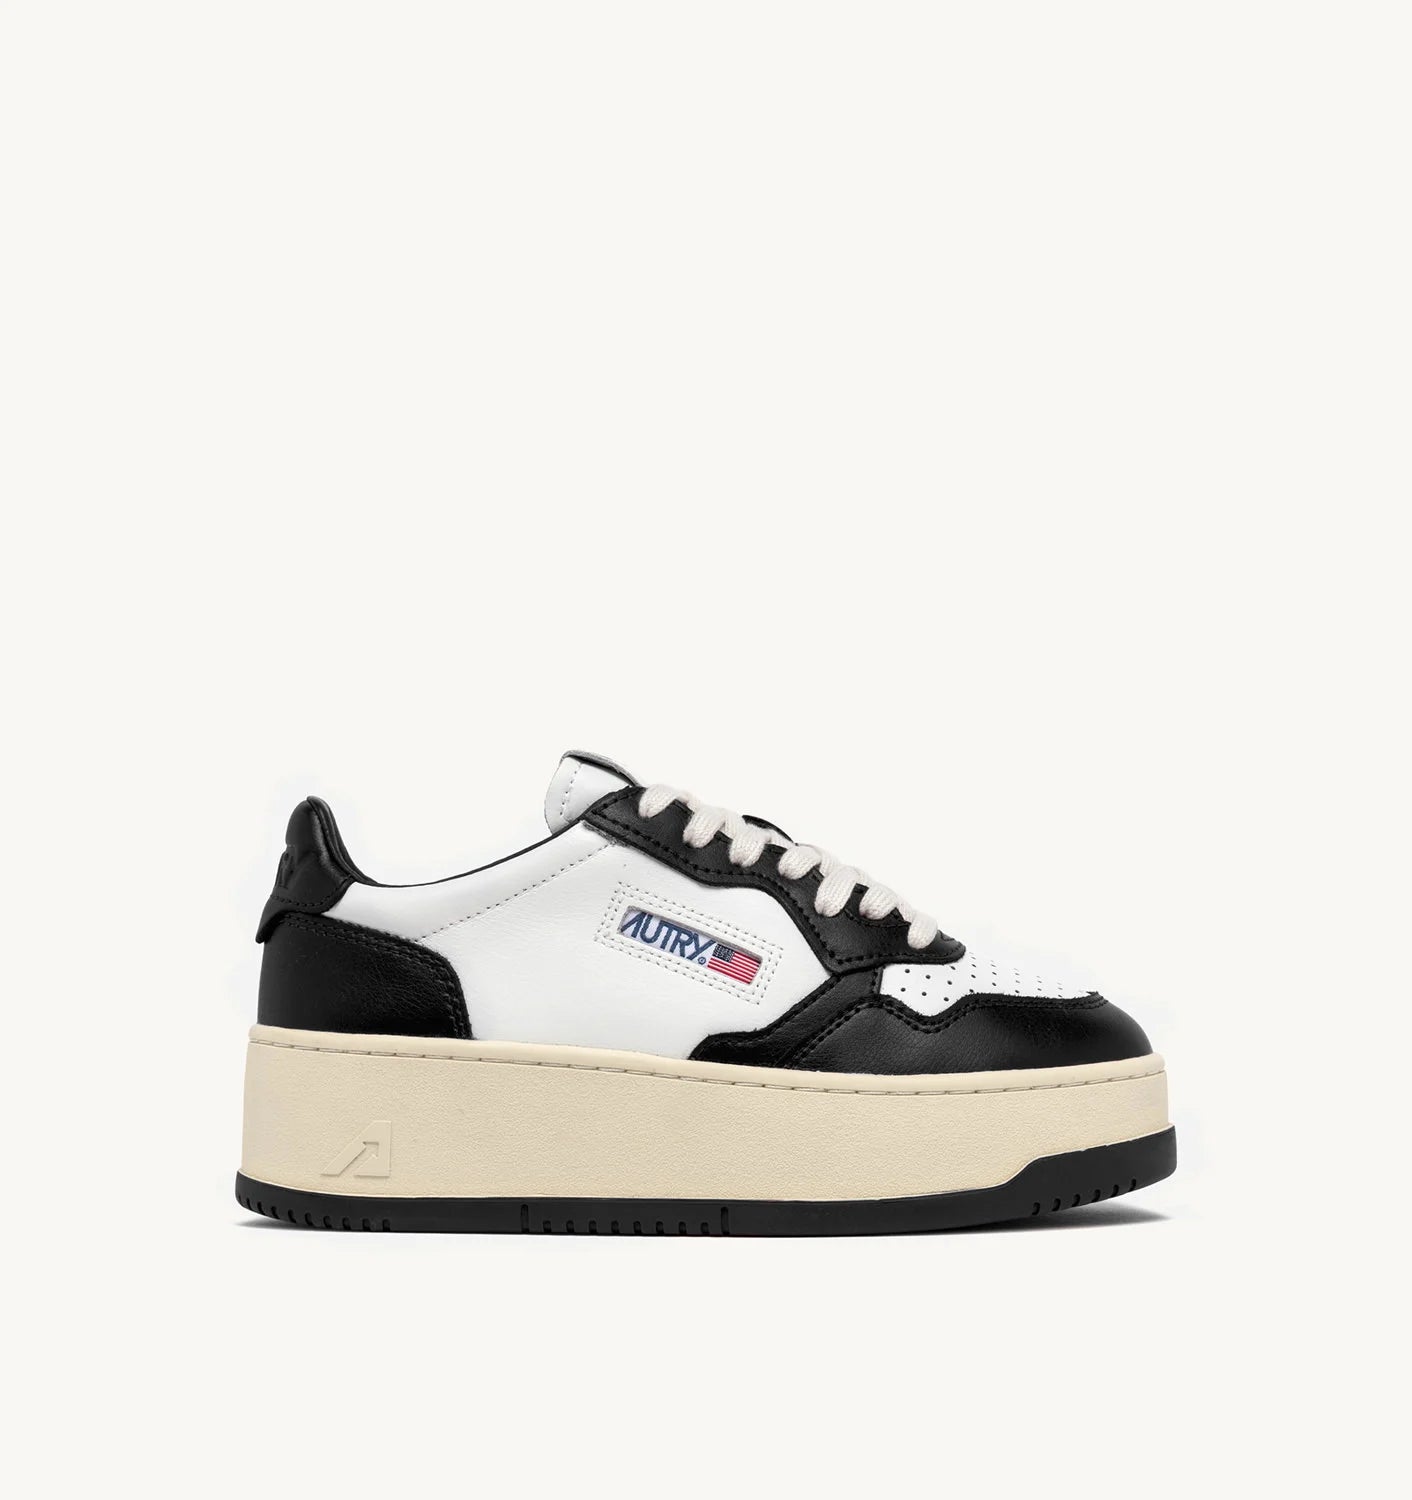 MEDALIST PLATFORM SNEAKERS IN WHITE AND BLACK LEATHER